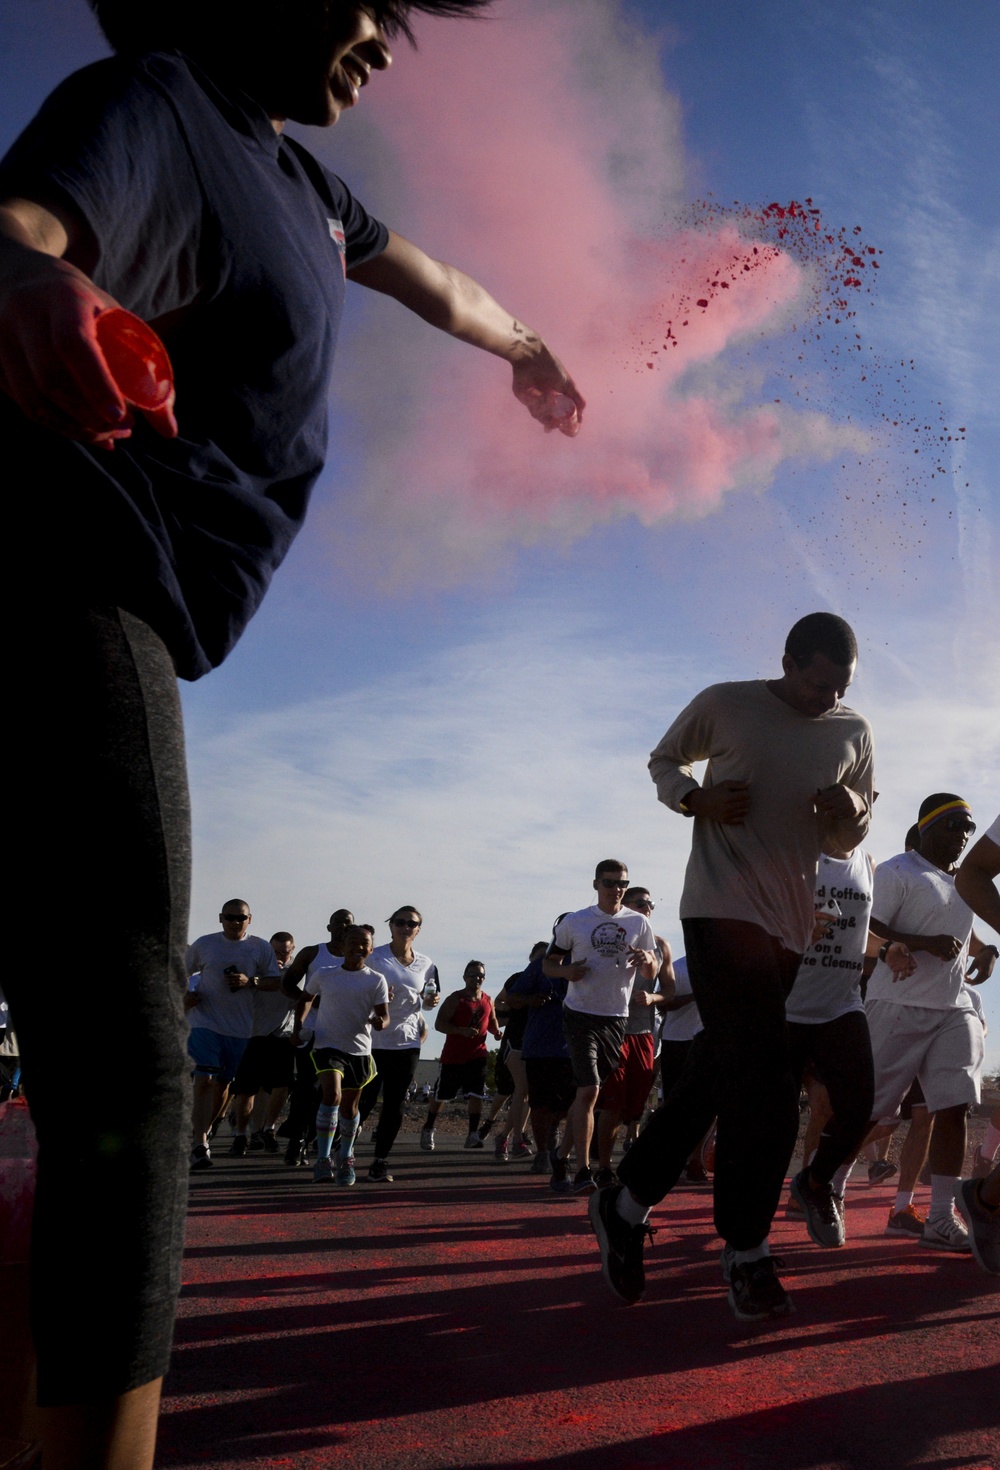 5K Color Run for Comprehensive Airman Fitness